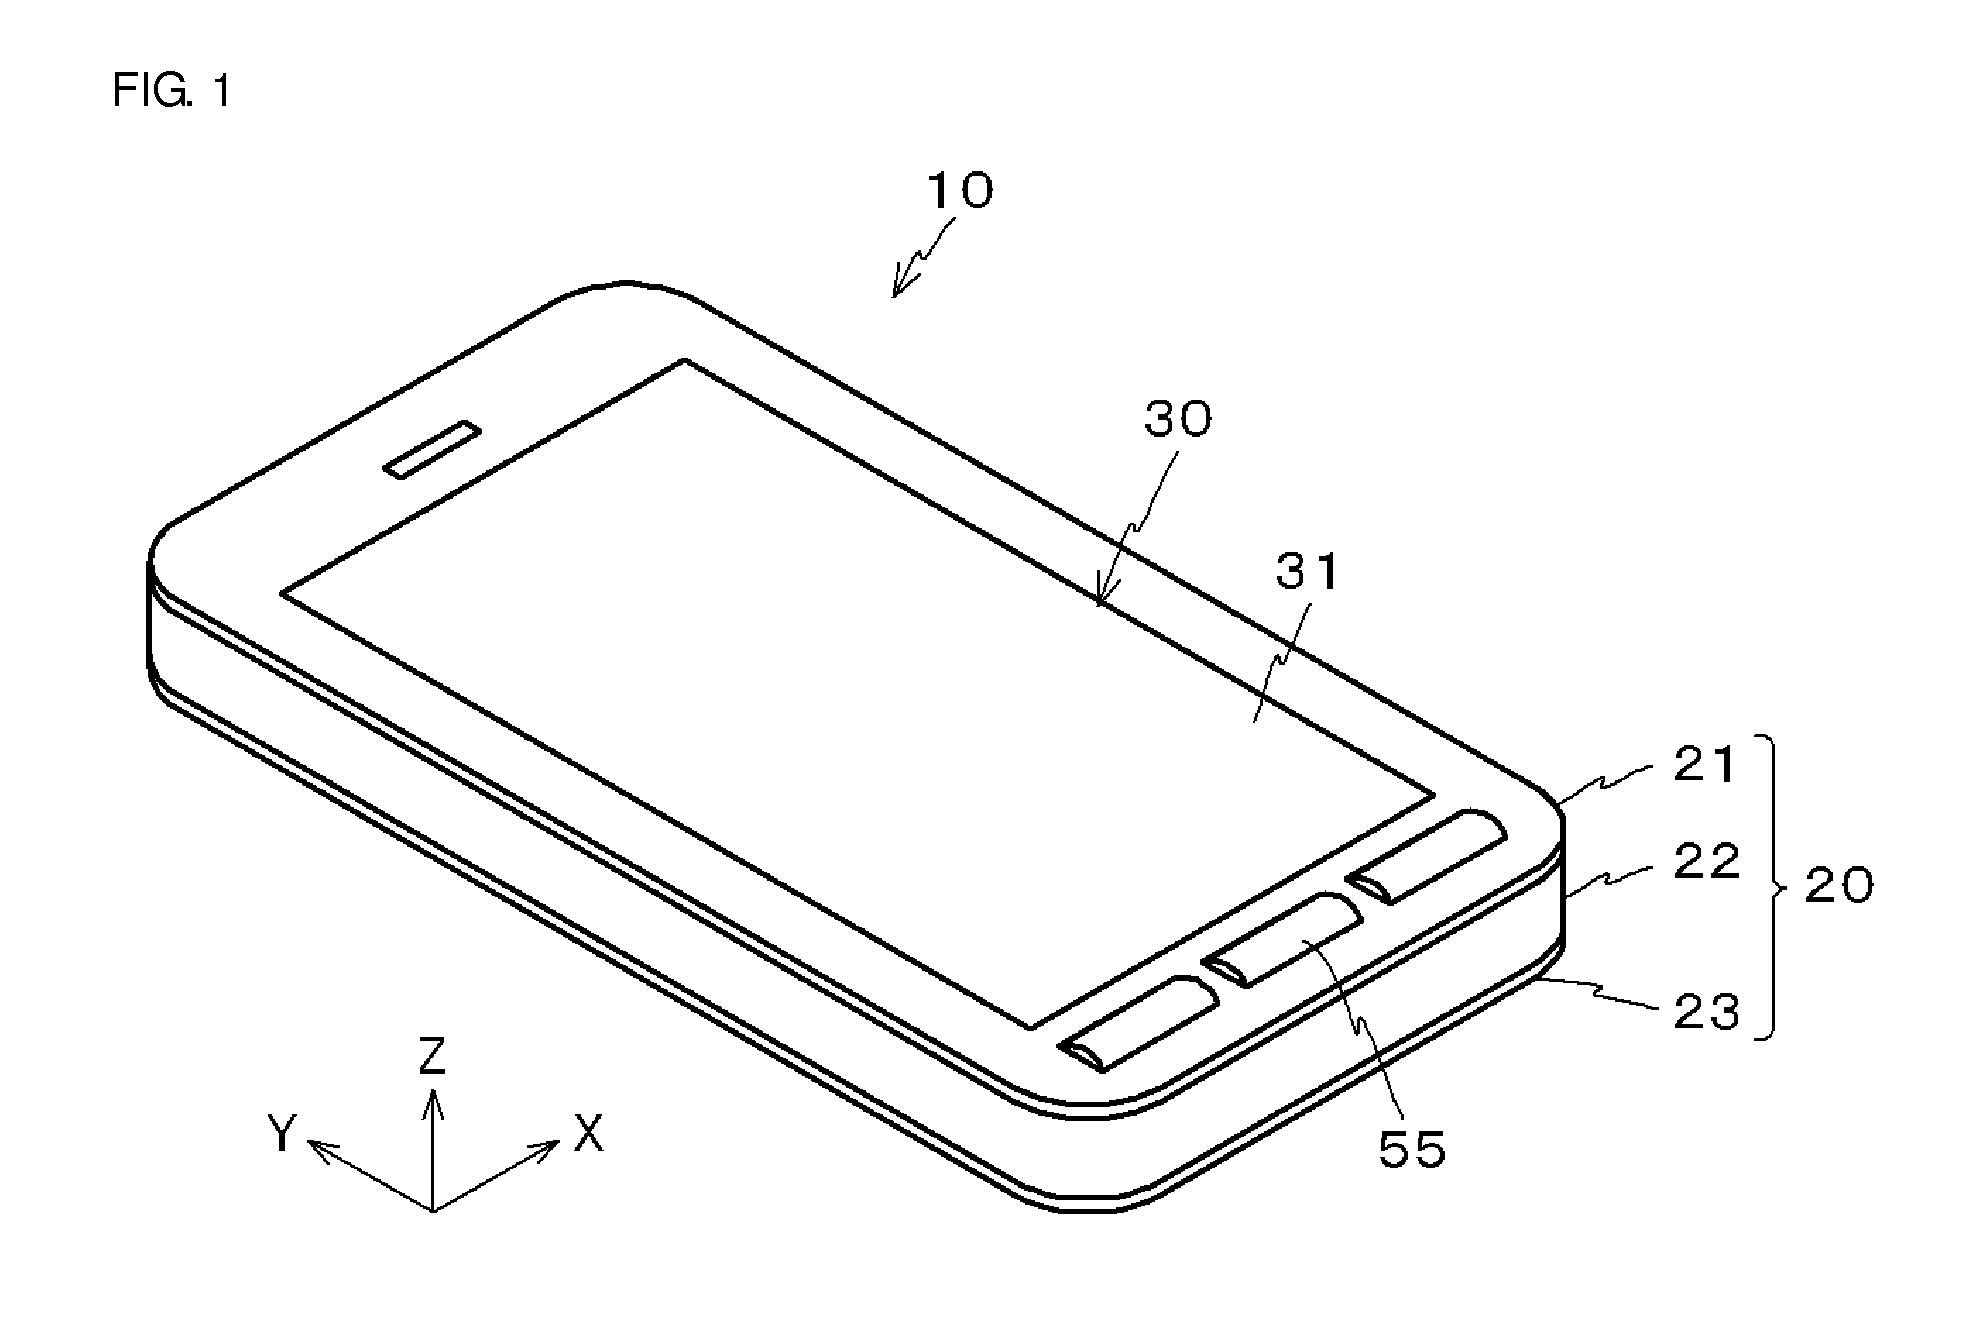 Interface and communication device